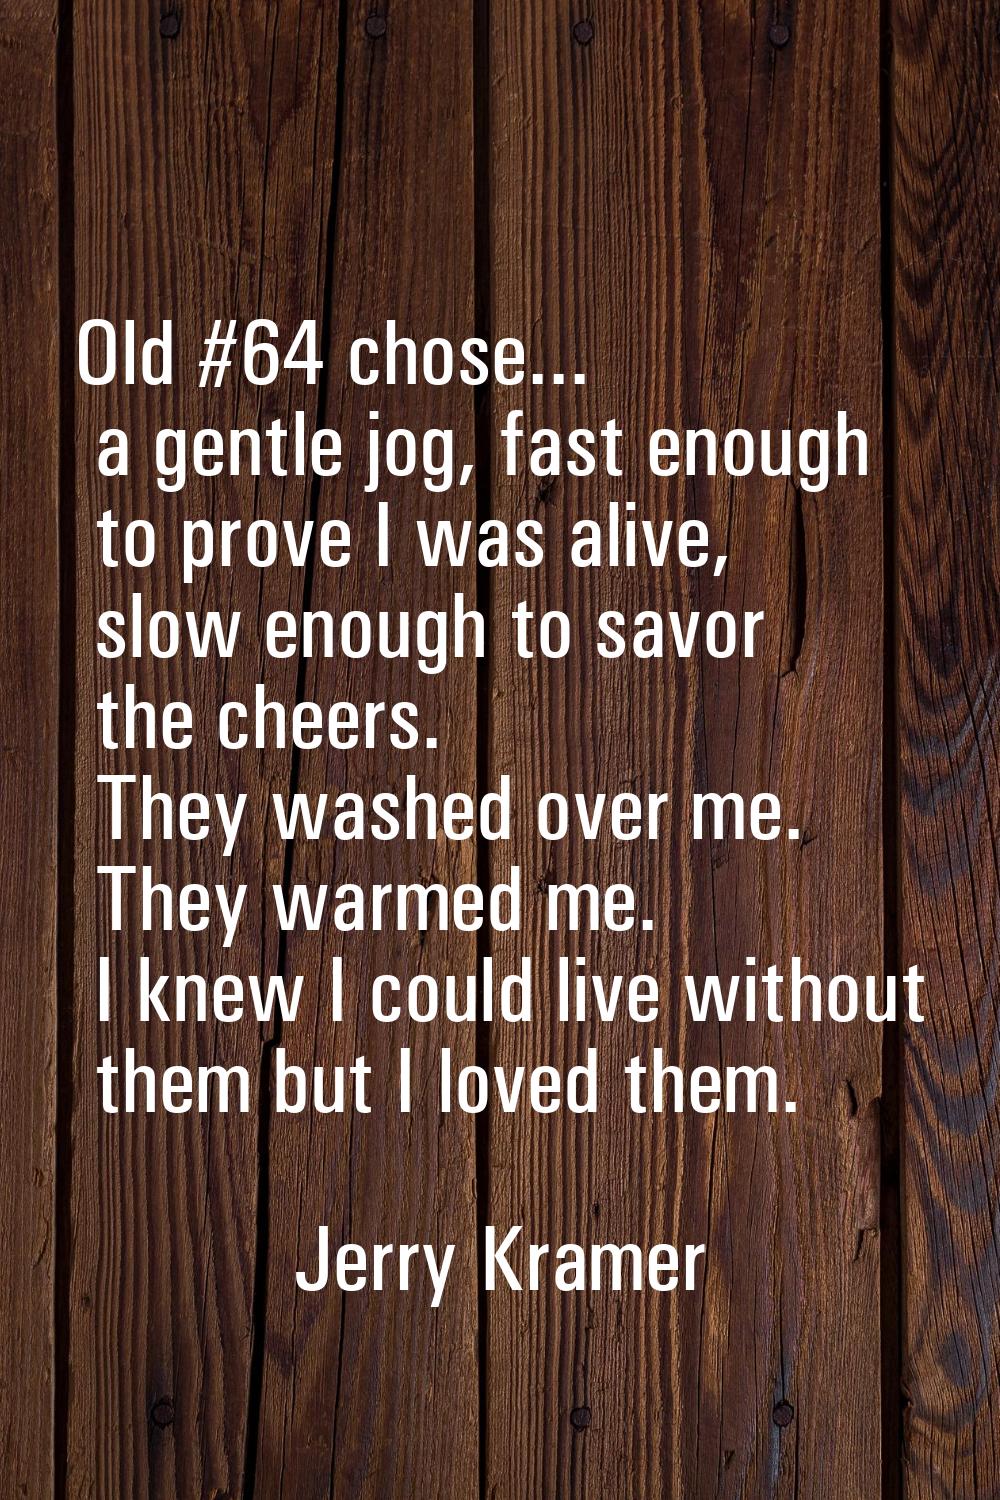 Old #64 chose... a gentle jog, fast enough to prove I was alive, slow enough to savor the cheers. T